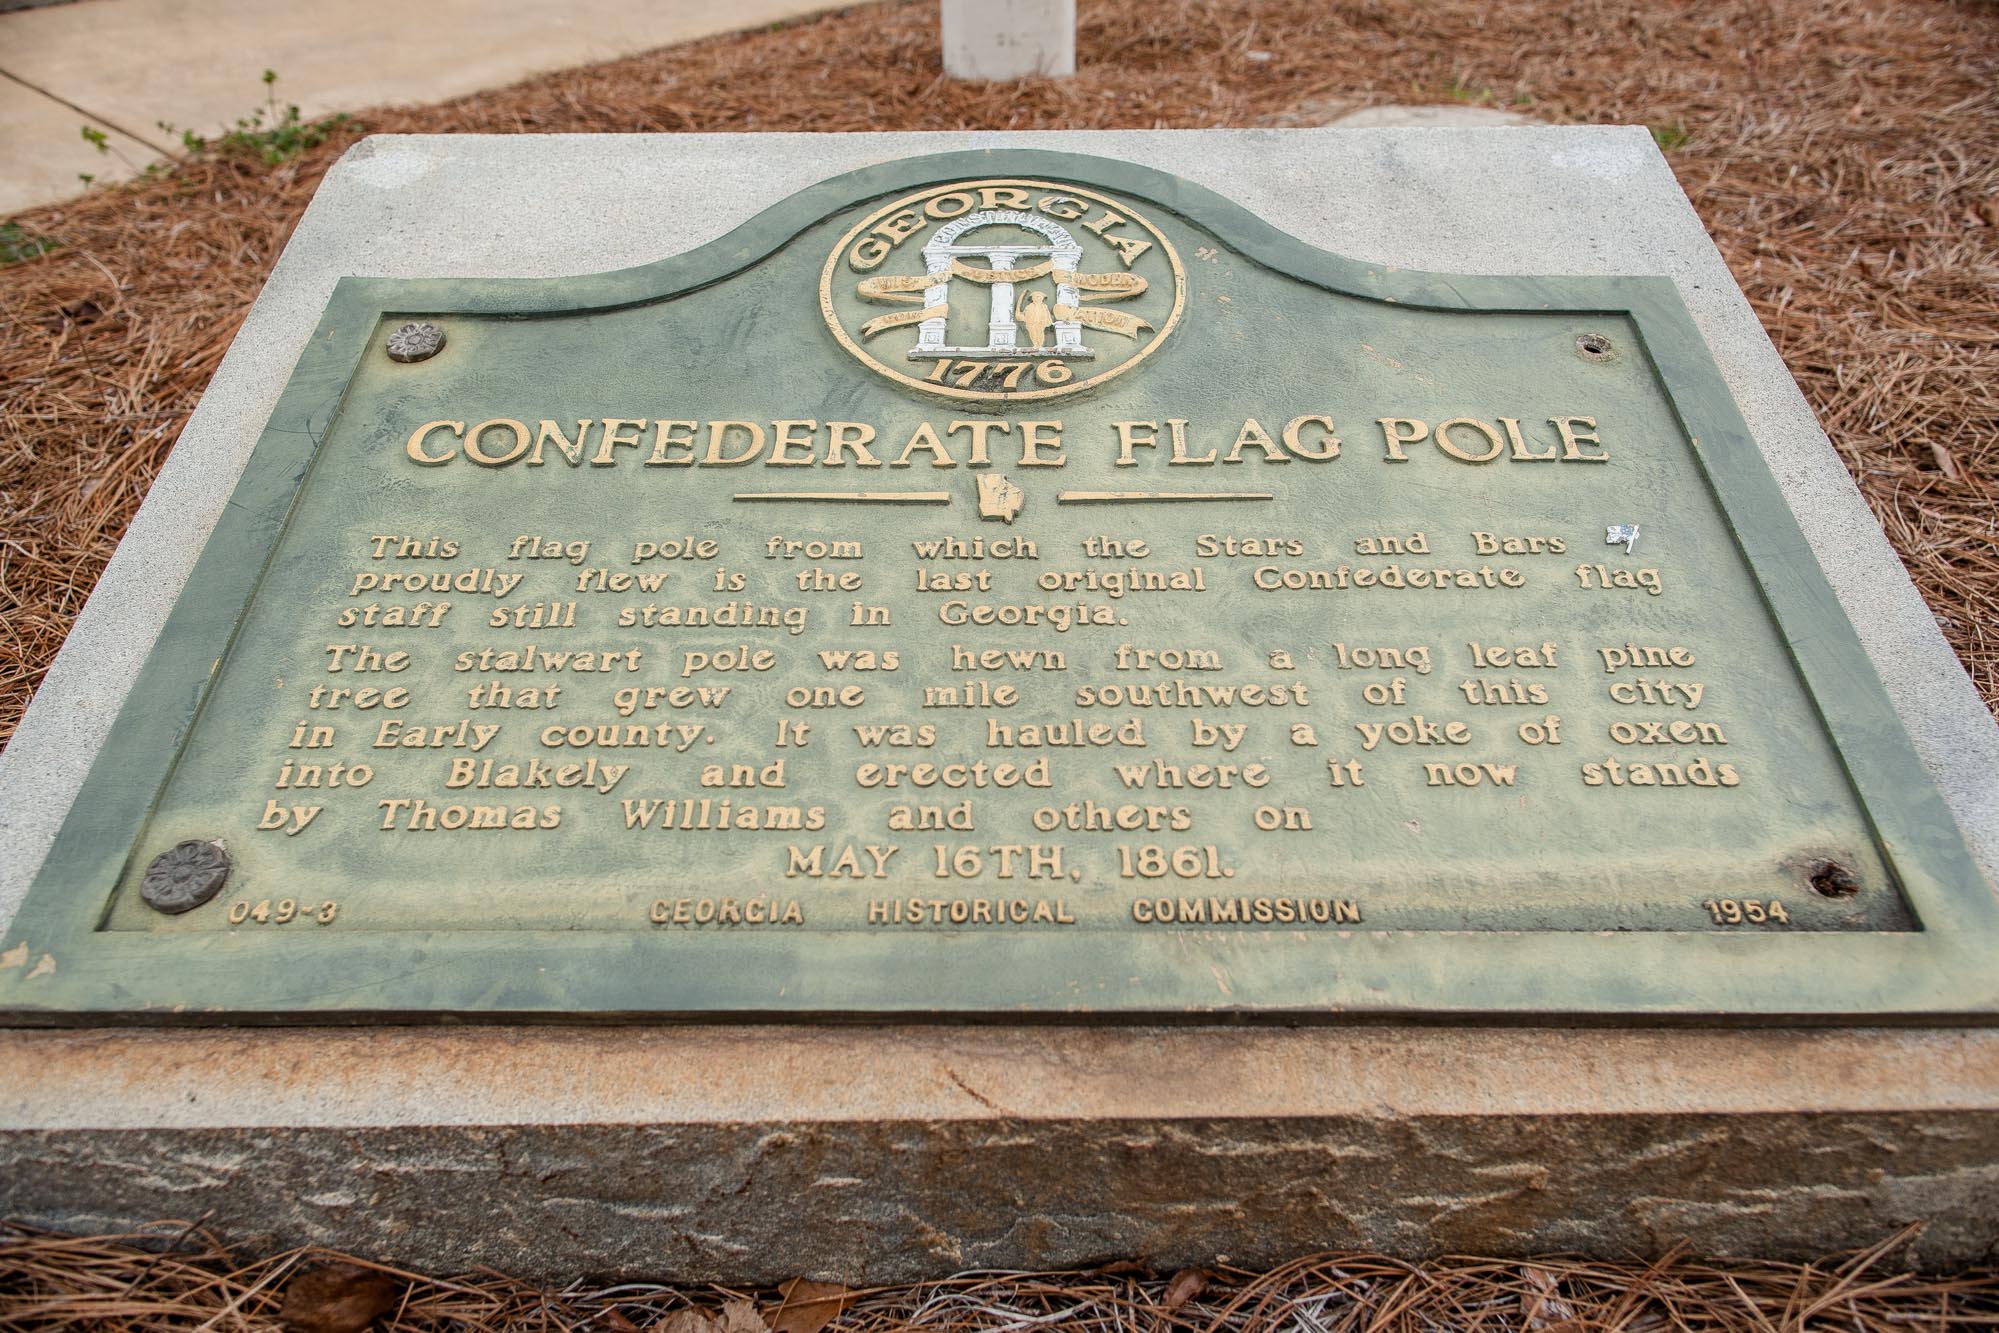 A Confederate Flagpole, raised in April 1861 at the Early County Courthouse, still stands today. Encased in fiberglass for the 100th anniversary of the American Civil War, the flagpole, made of white pine, stands as a tribute to the Early County Confederate veterans who marched off to war as ordered by the State of Georgia.